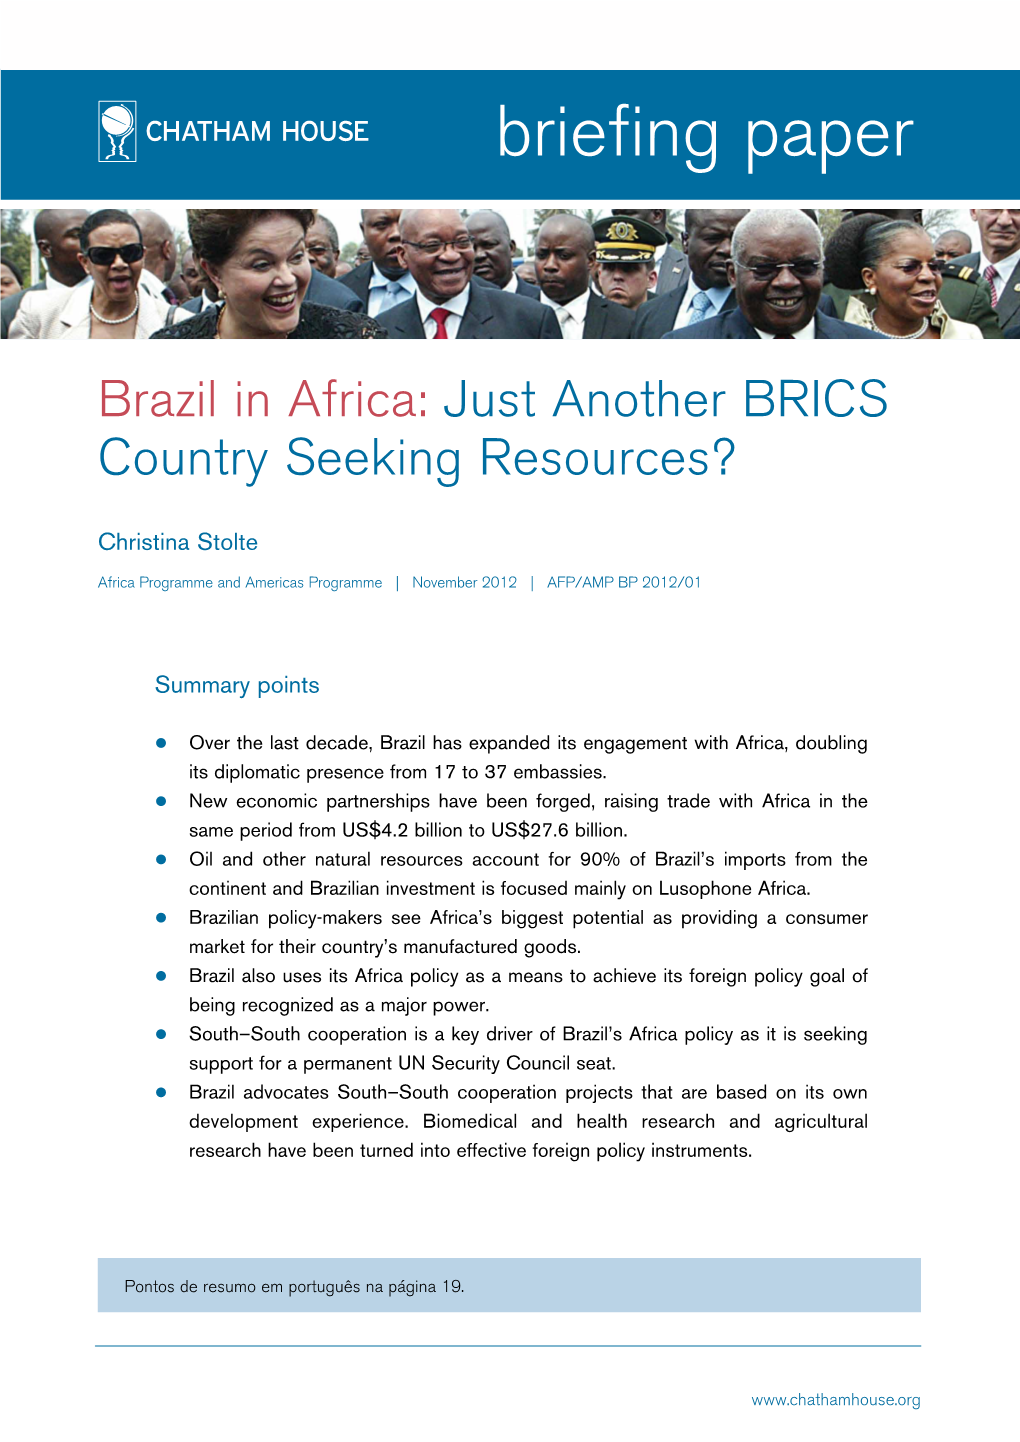 Brazil in Africa: Just Another BRICS Country Seeking Resources? Page 2